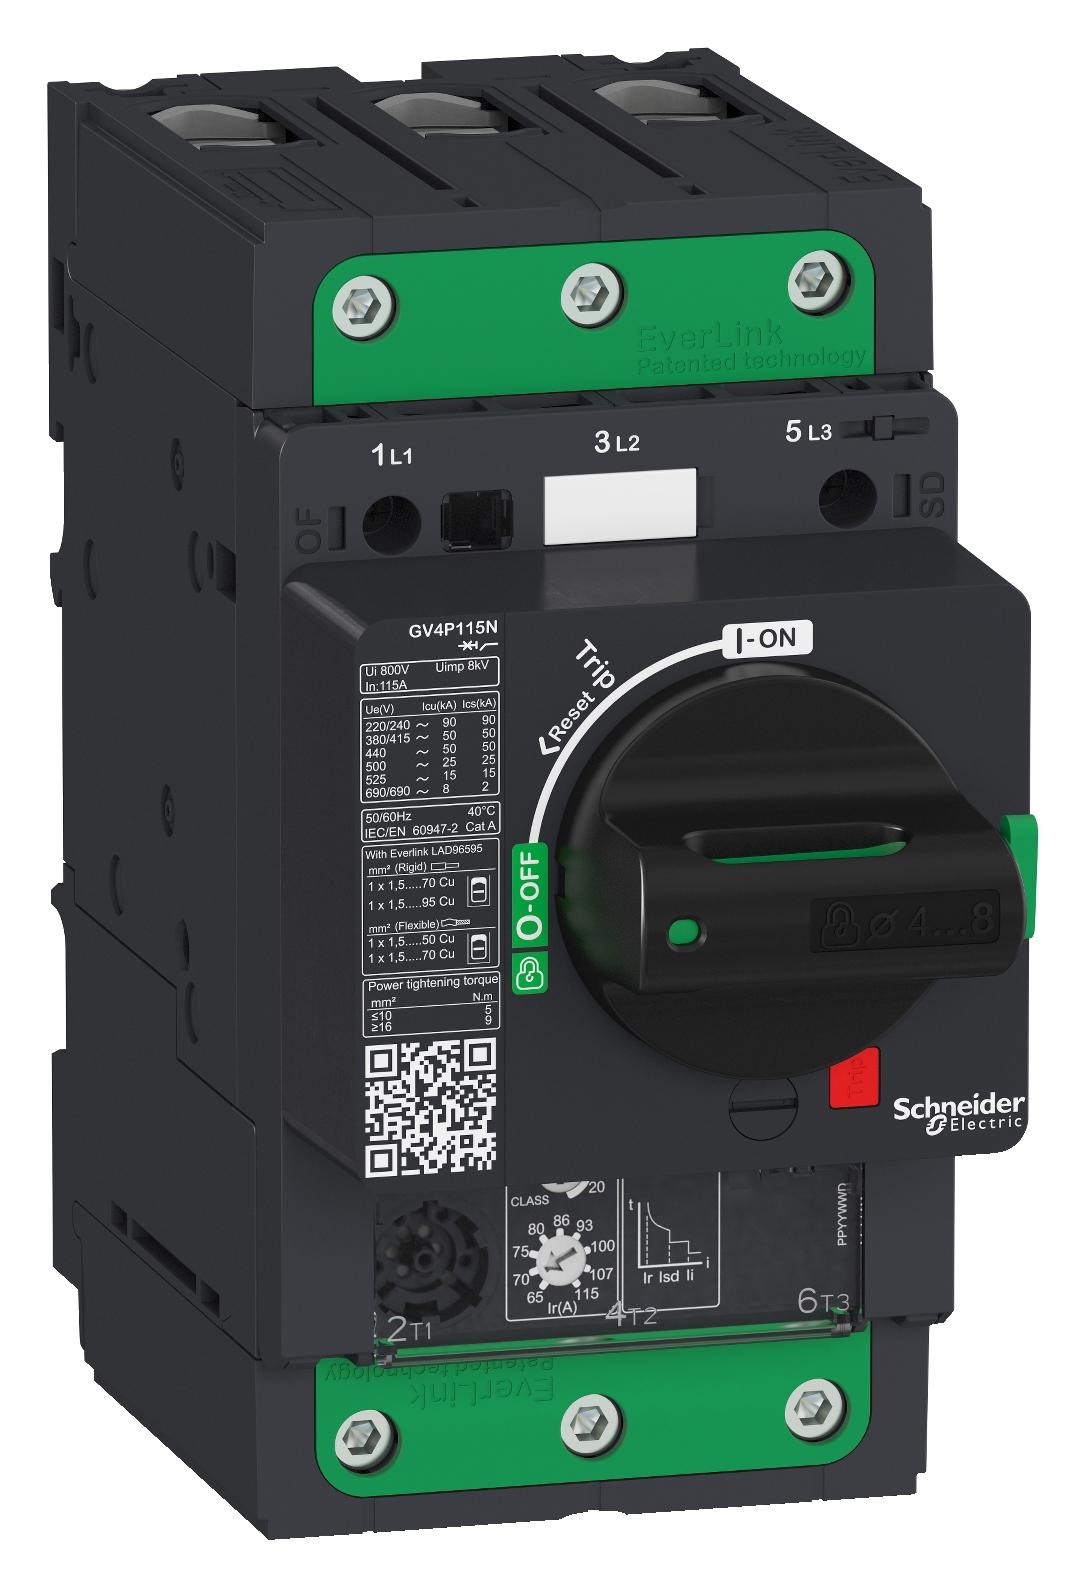 GV4P115N THERMOMAGNETIC CKT BREAKER, 3P, 115A SCHNEIDER ELECTRIC